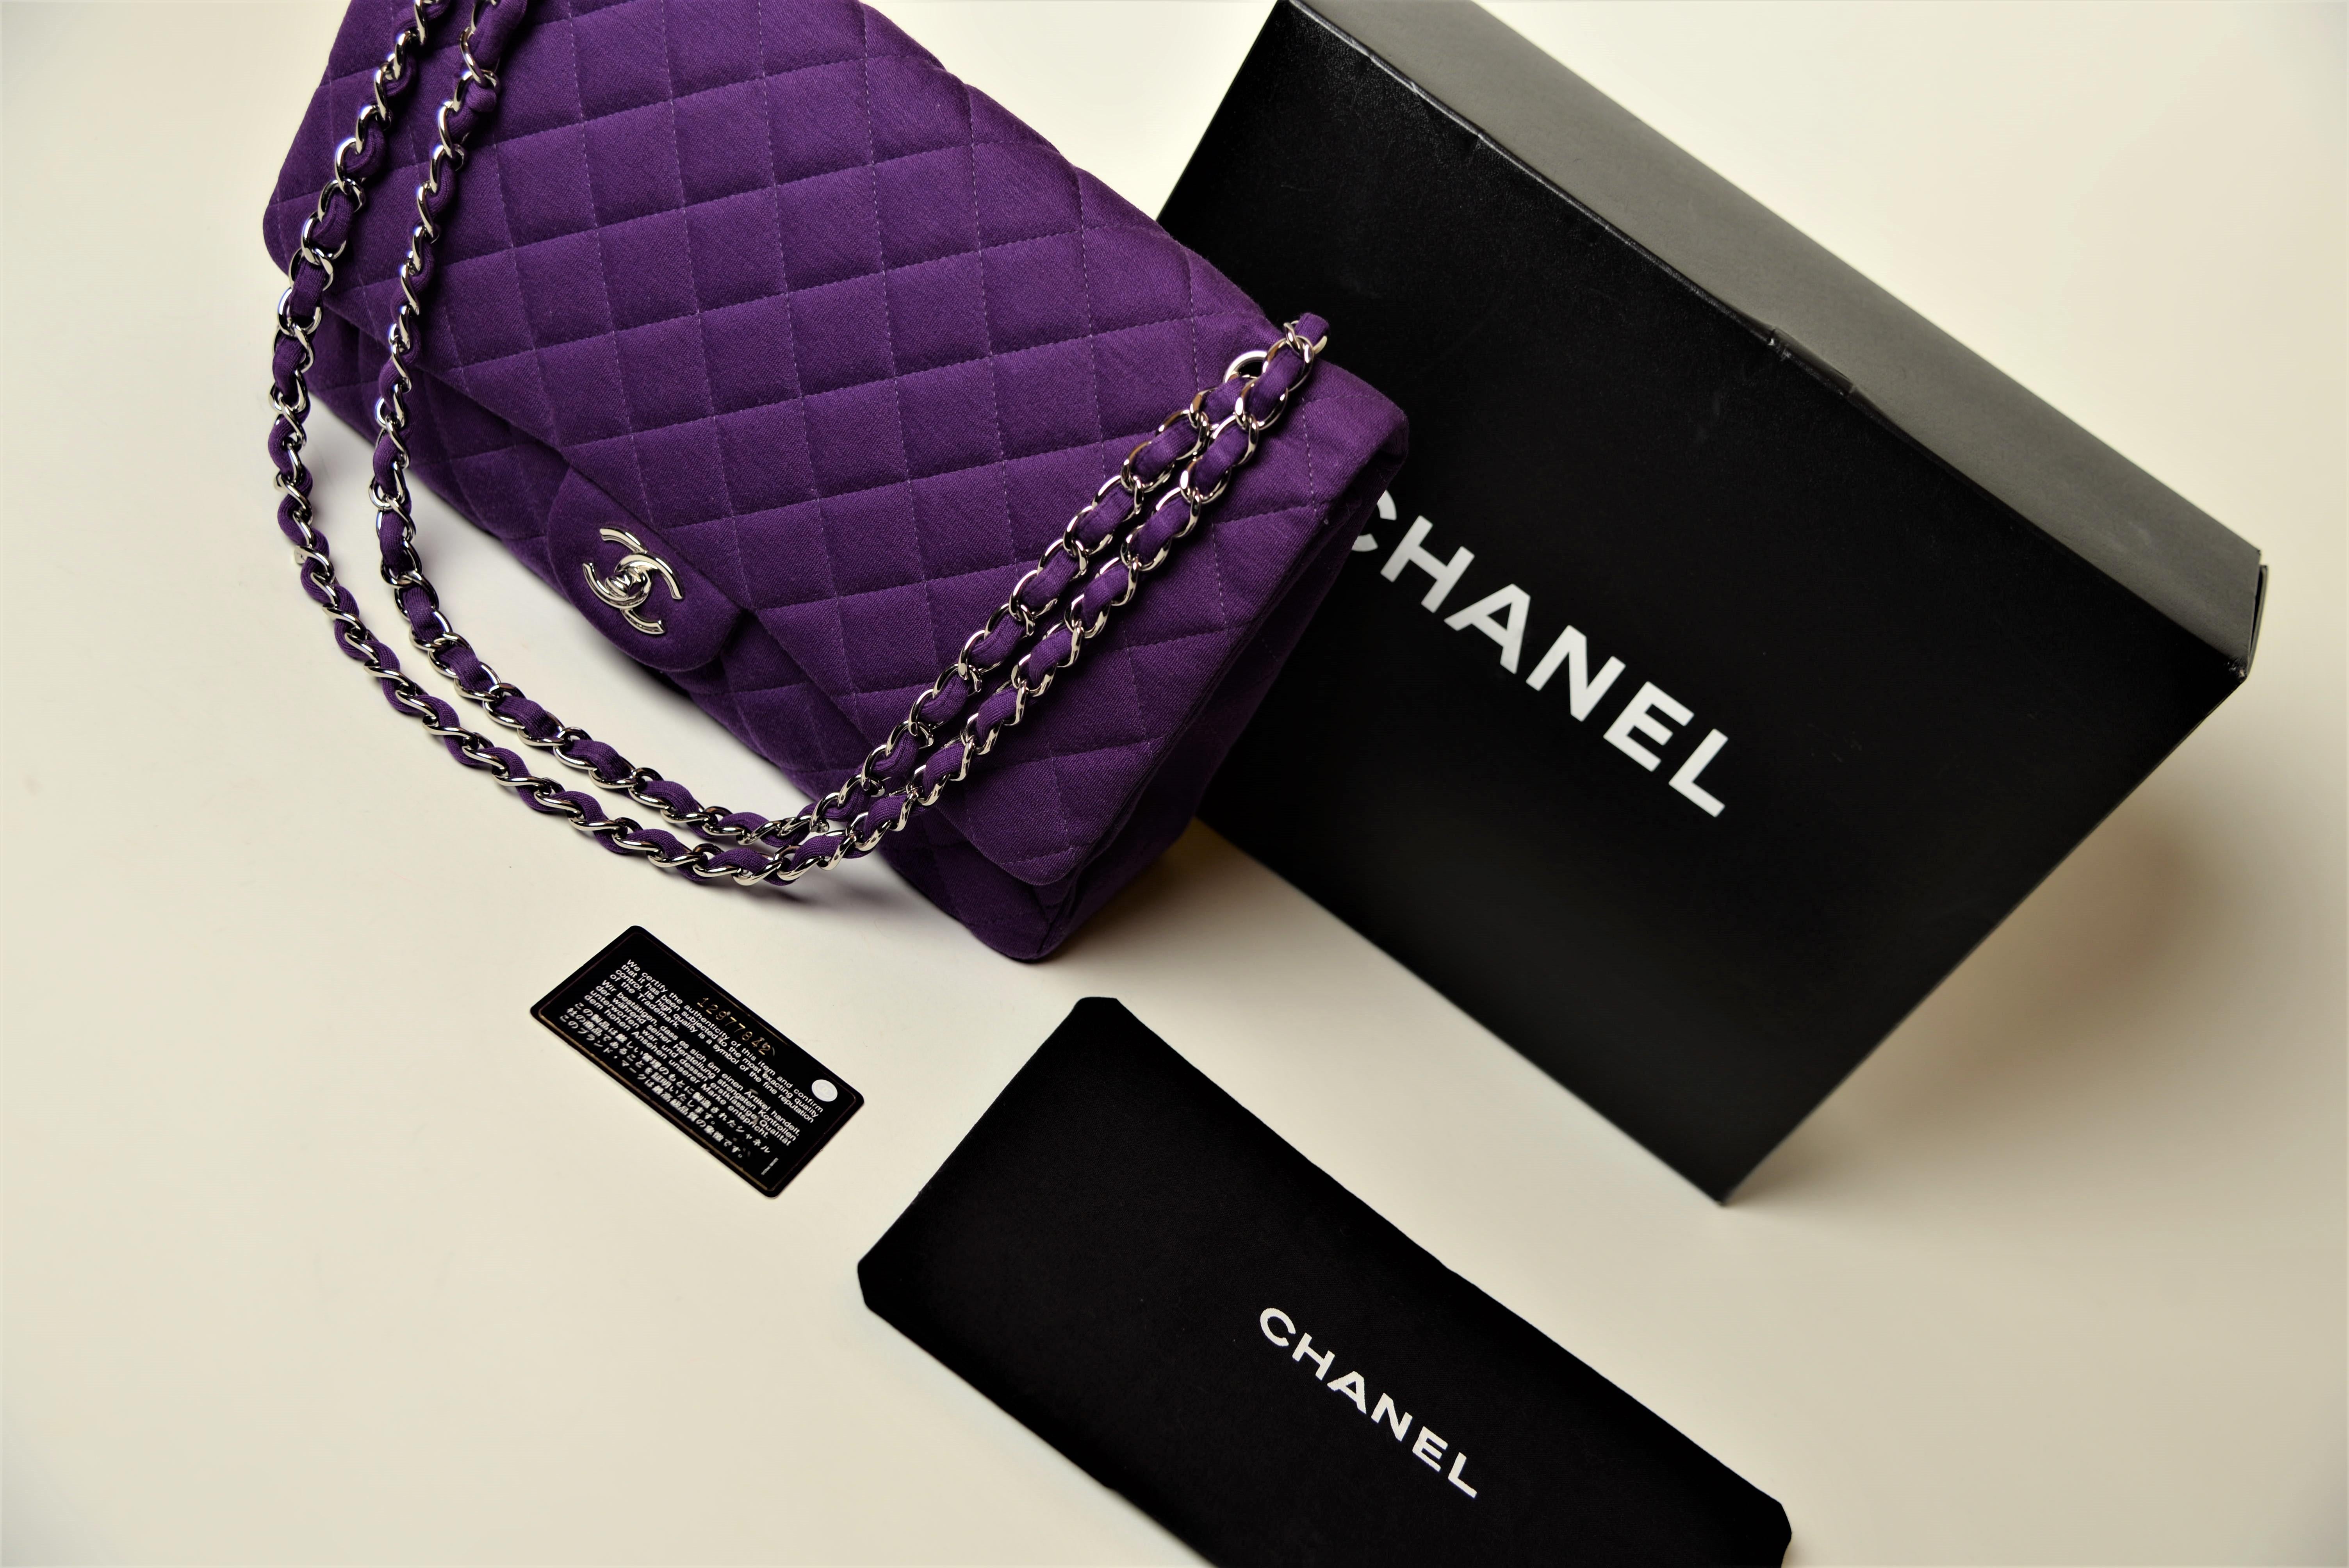 From the collection of SAVINETI we offer this Chanel Maxi Flap Jersey:
-	Brand: Chanel
-	Model: Maxi Flap Bag
-	Year: 2008-2009
-	Code: 12977842
-	Condition: Very Good
-	Materials: Jersey fabric & silver-tone hardware
-	Extras: Full-Set (Chanel box,